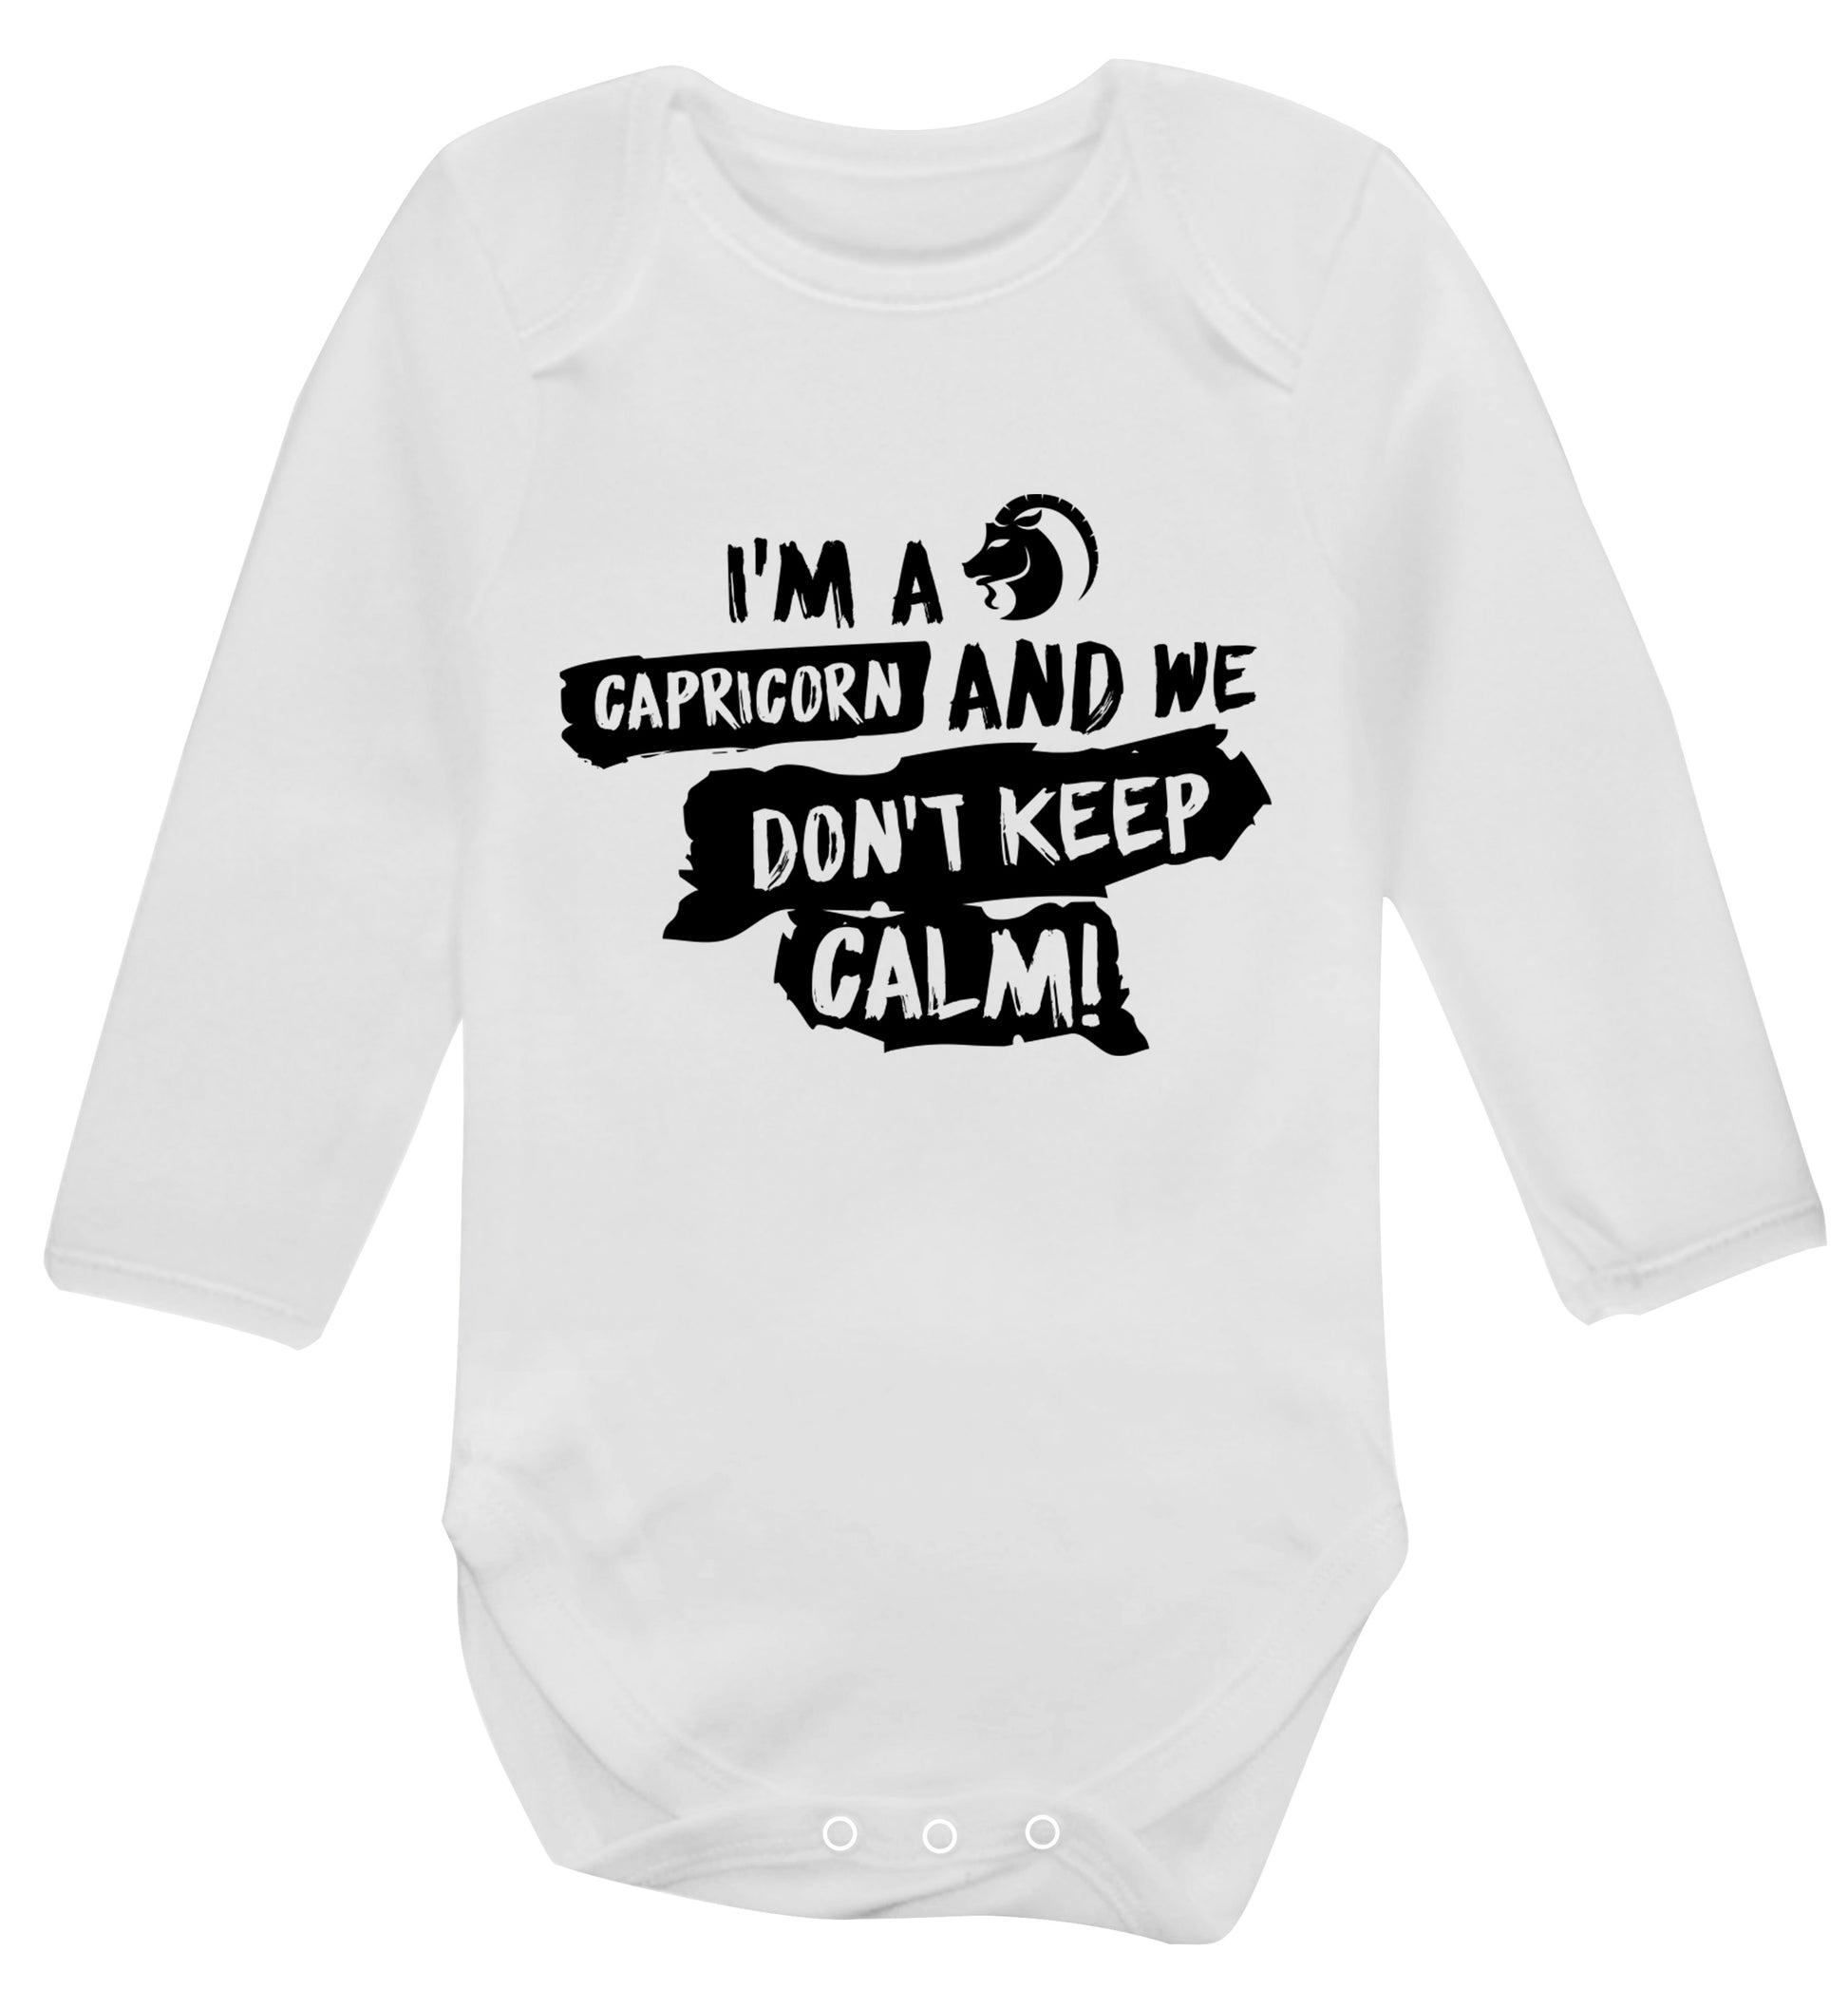 I'm a capricorn and we don't keep calm Baby Vest long sleeved white 6-12 months